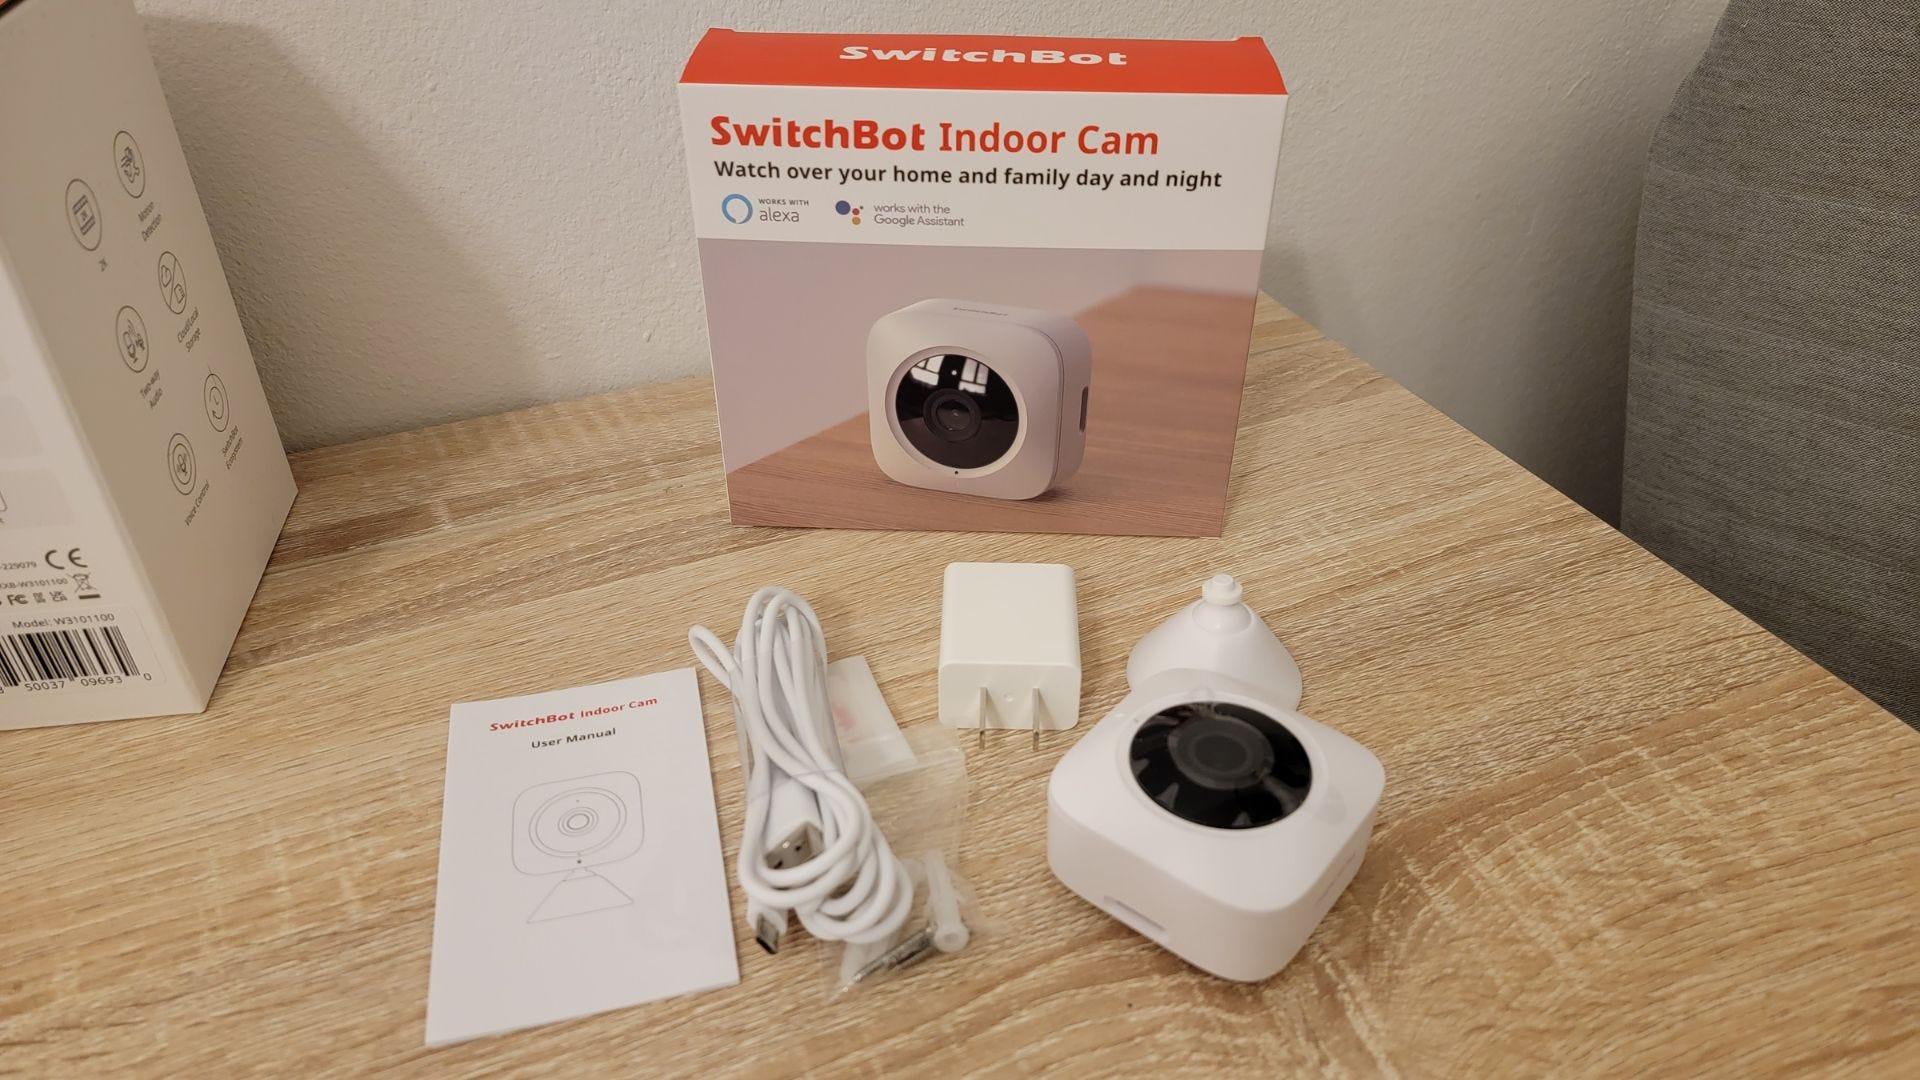 SwitchBot Indoor Security camera box and contents sitting on wood desk